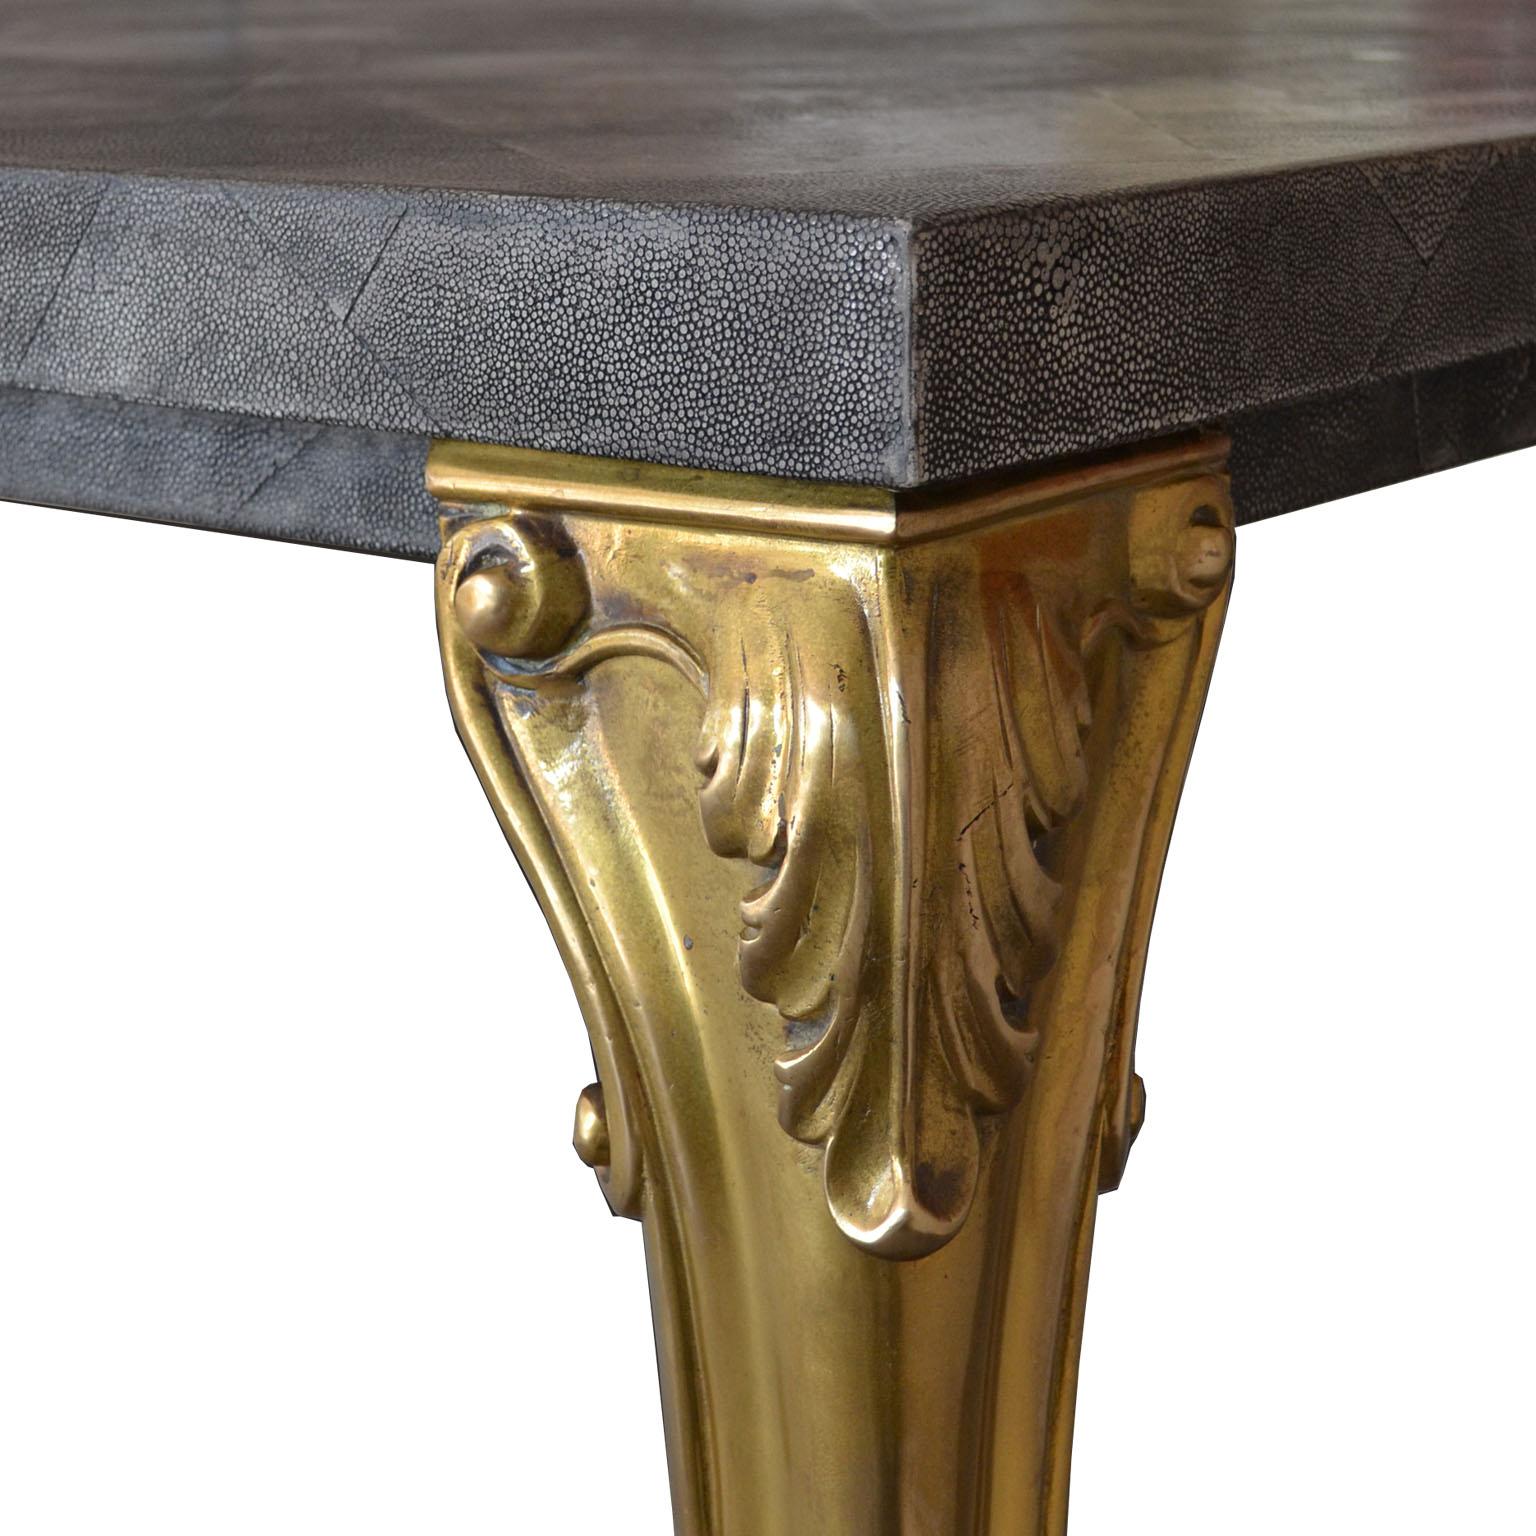 This is a sophisticated dining table, the perfect example of the continuous research of our handicraft laboratory where we emphasize the material “scagliola” in the multitude of its various peculiarities.
The top of the table is decorated using the